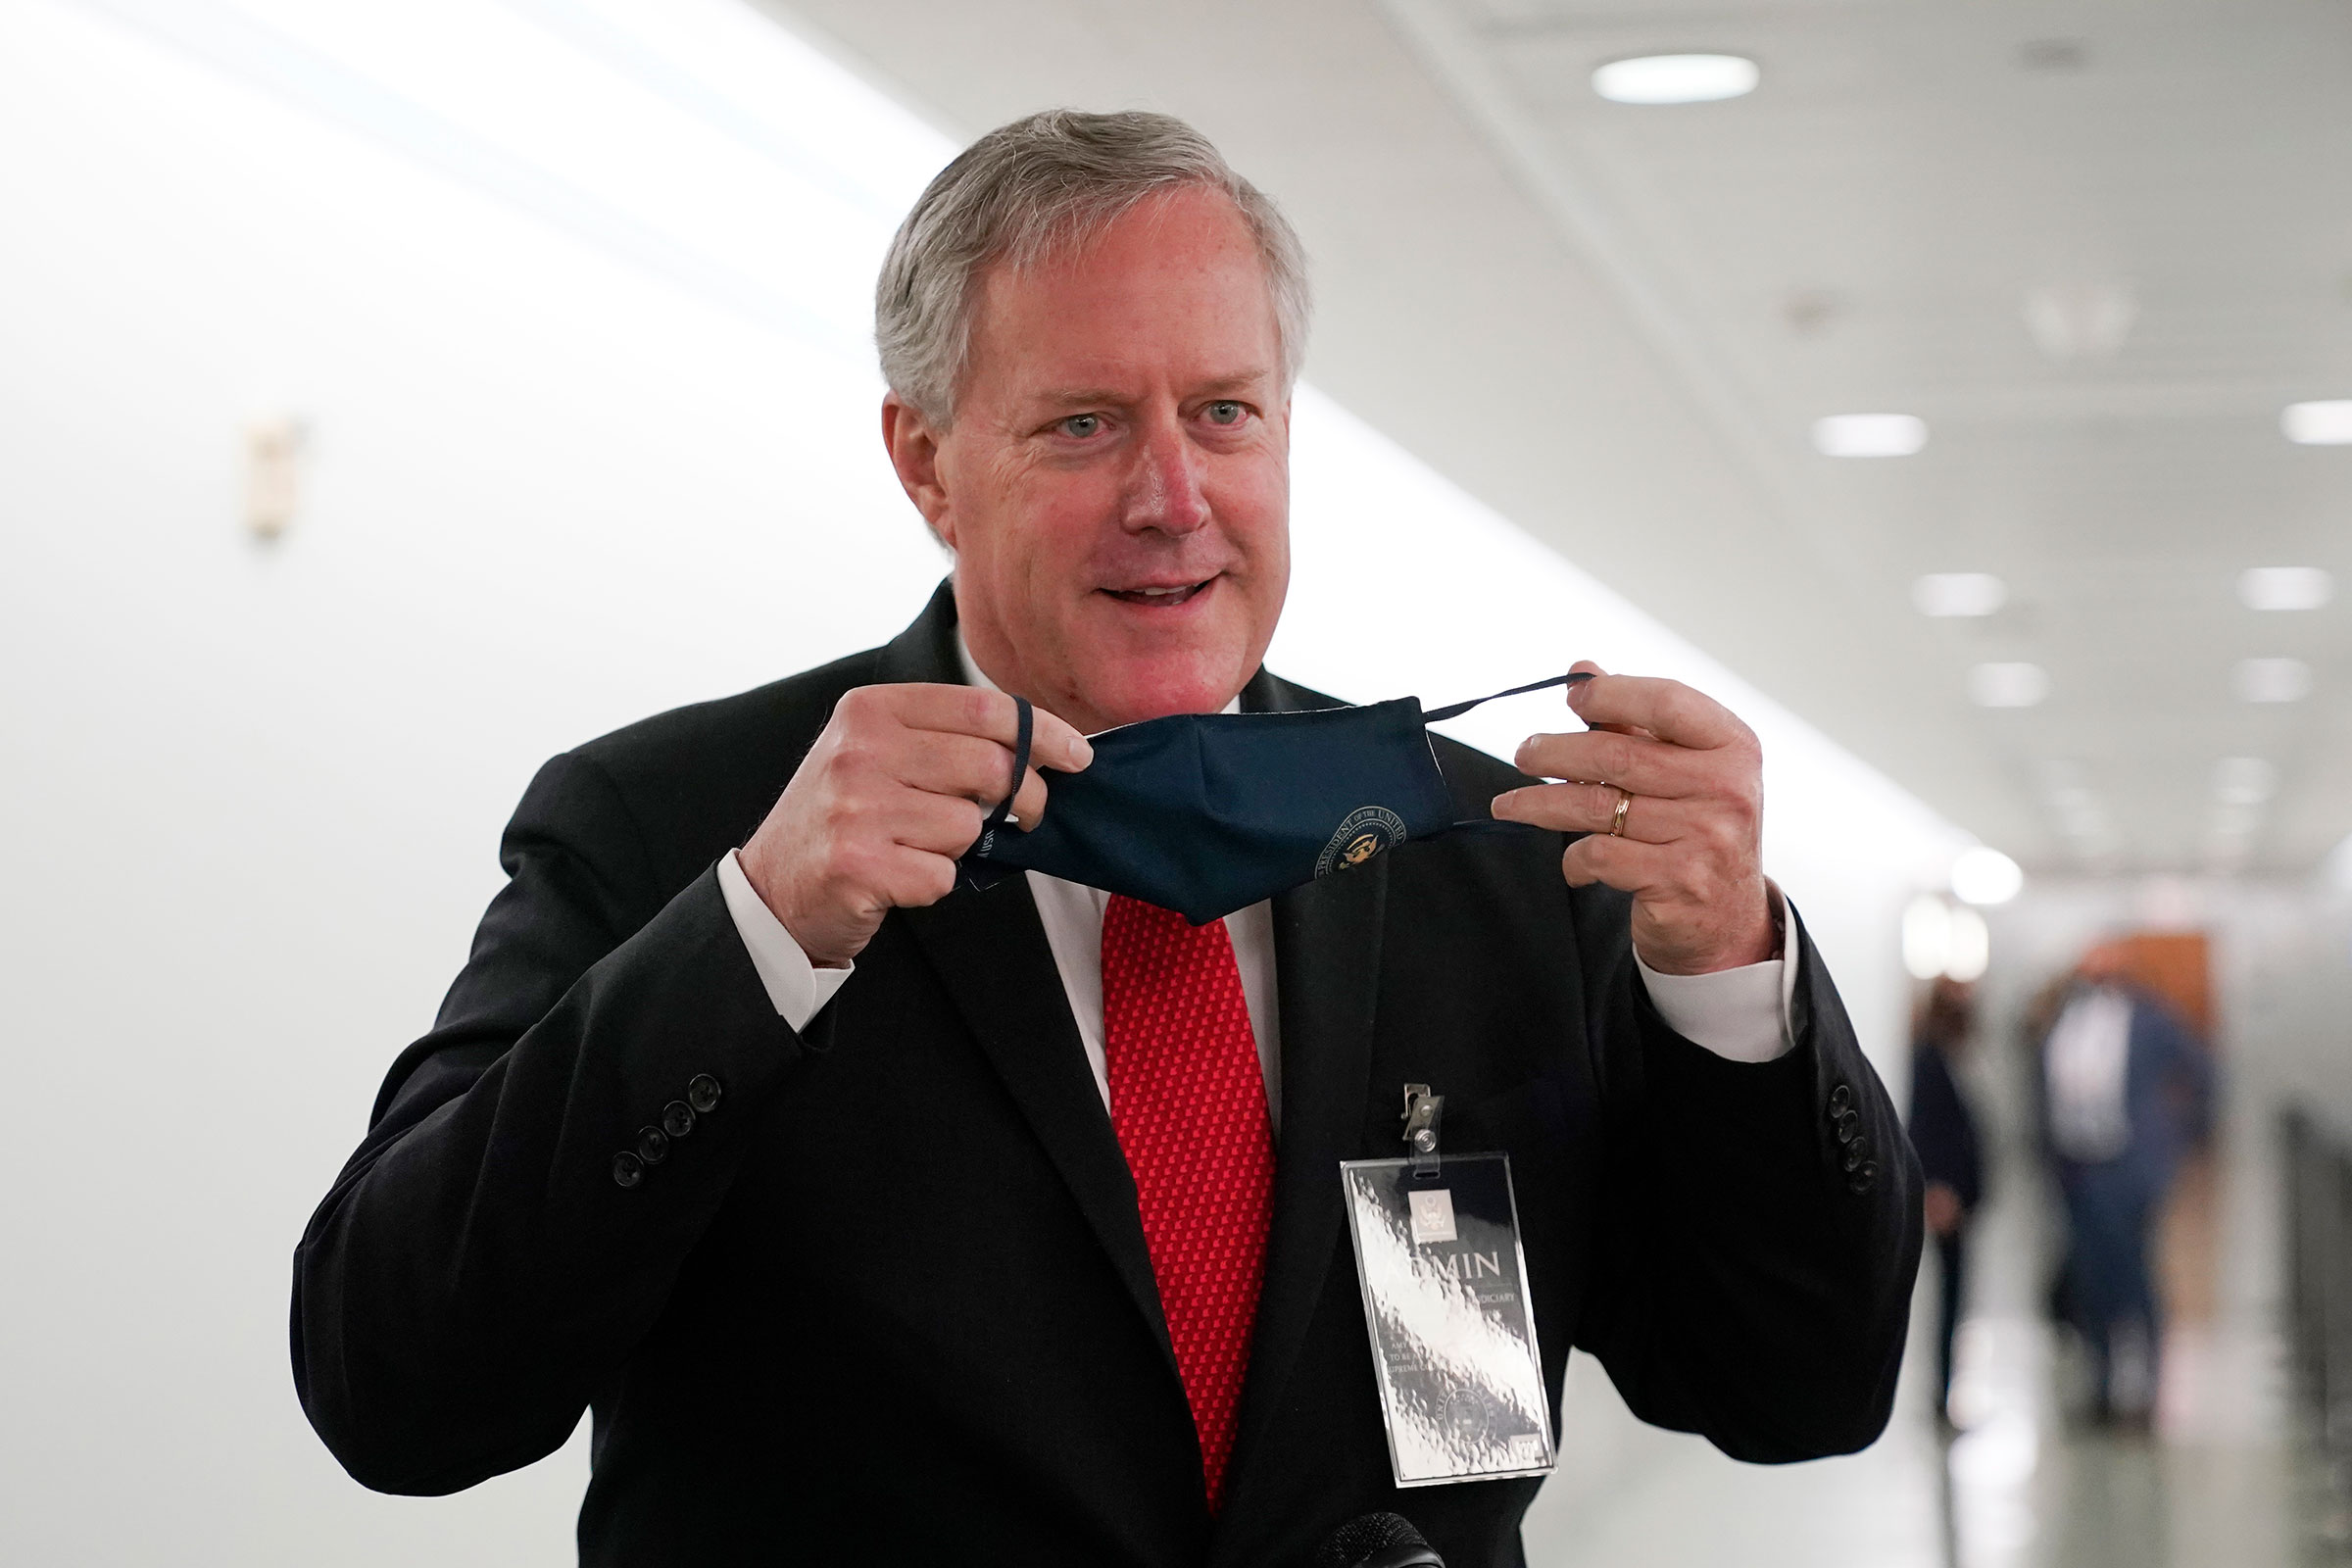 White House Chief of Staff Mark Meadows speaks to the media during a break in the confirmation hearing for Supreme Court nominee Amy Coney Barrett before the Senate Judiciary Committee on October 12 in Washington, DC. 